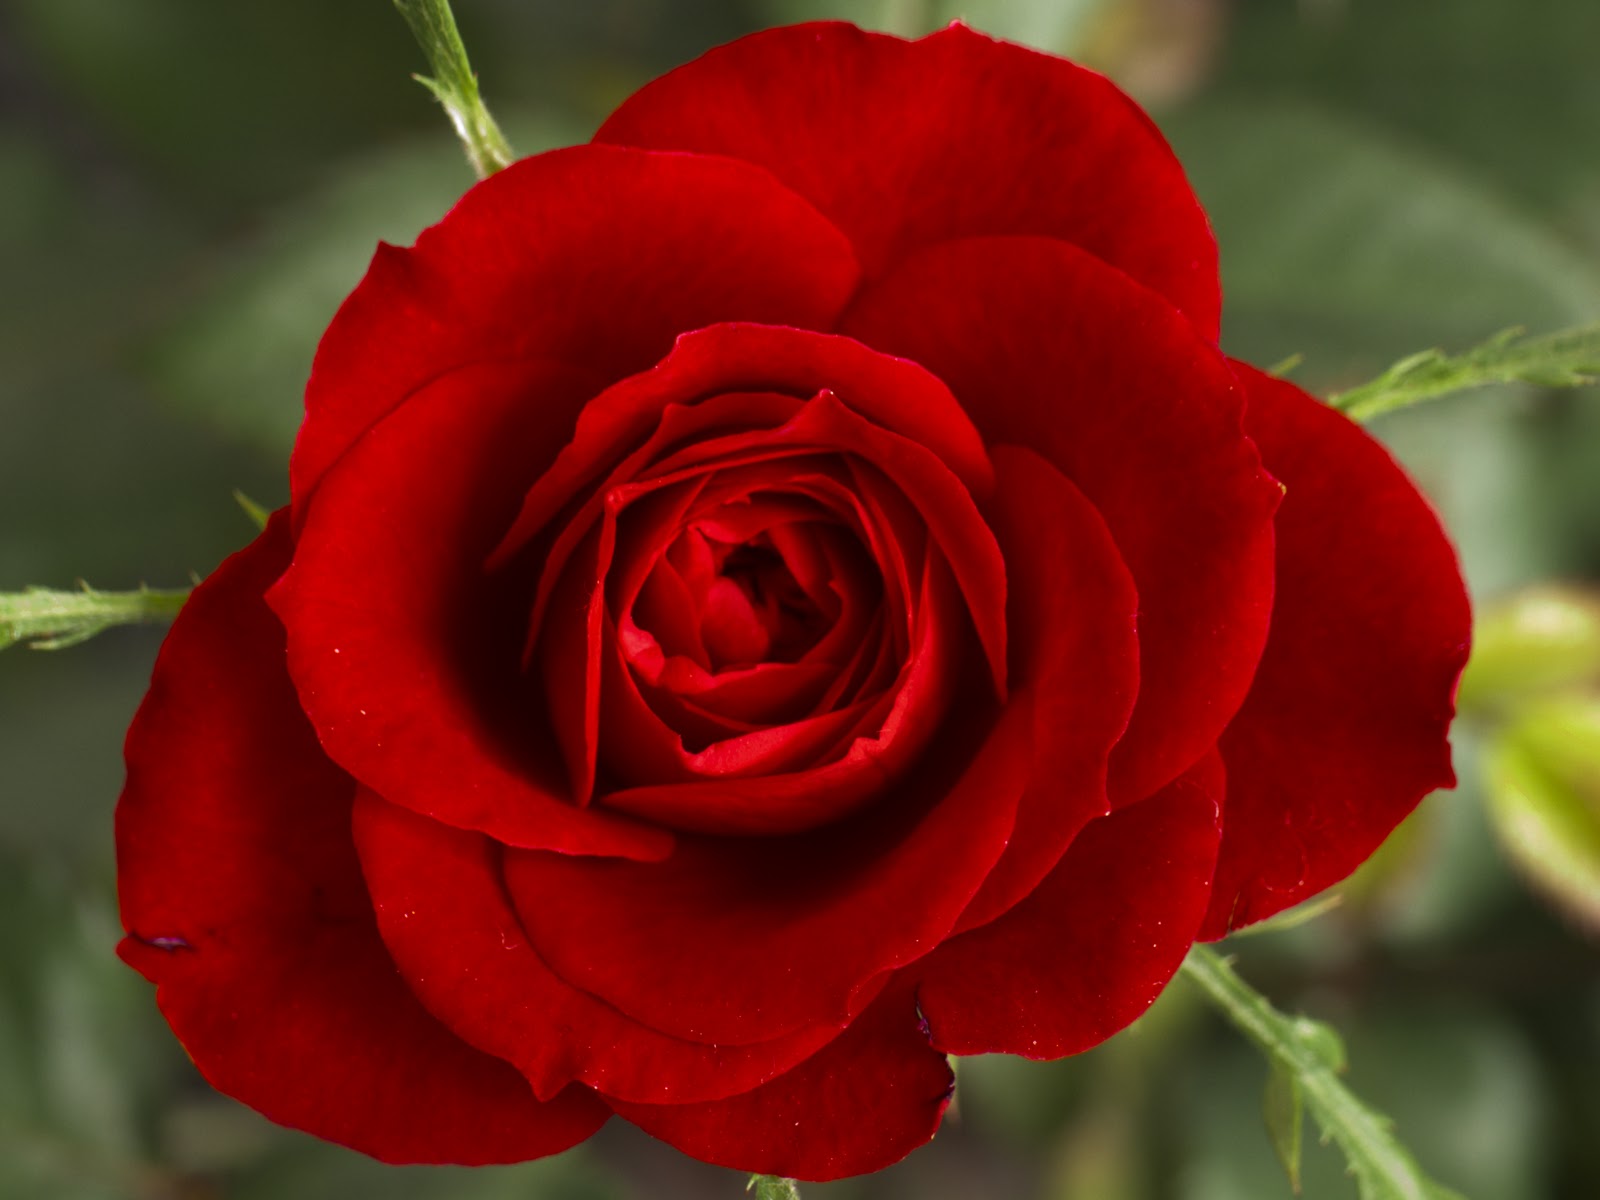  Pictures Red Rose Flowers Gifts Beautiful Red Roses Flowers